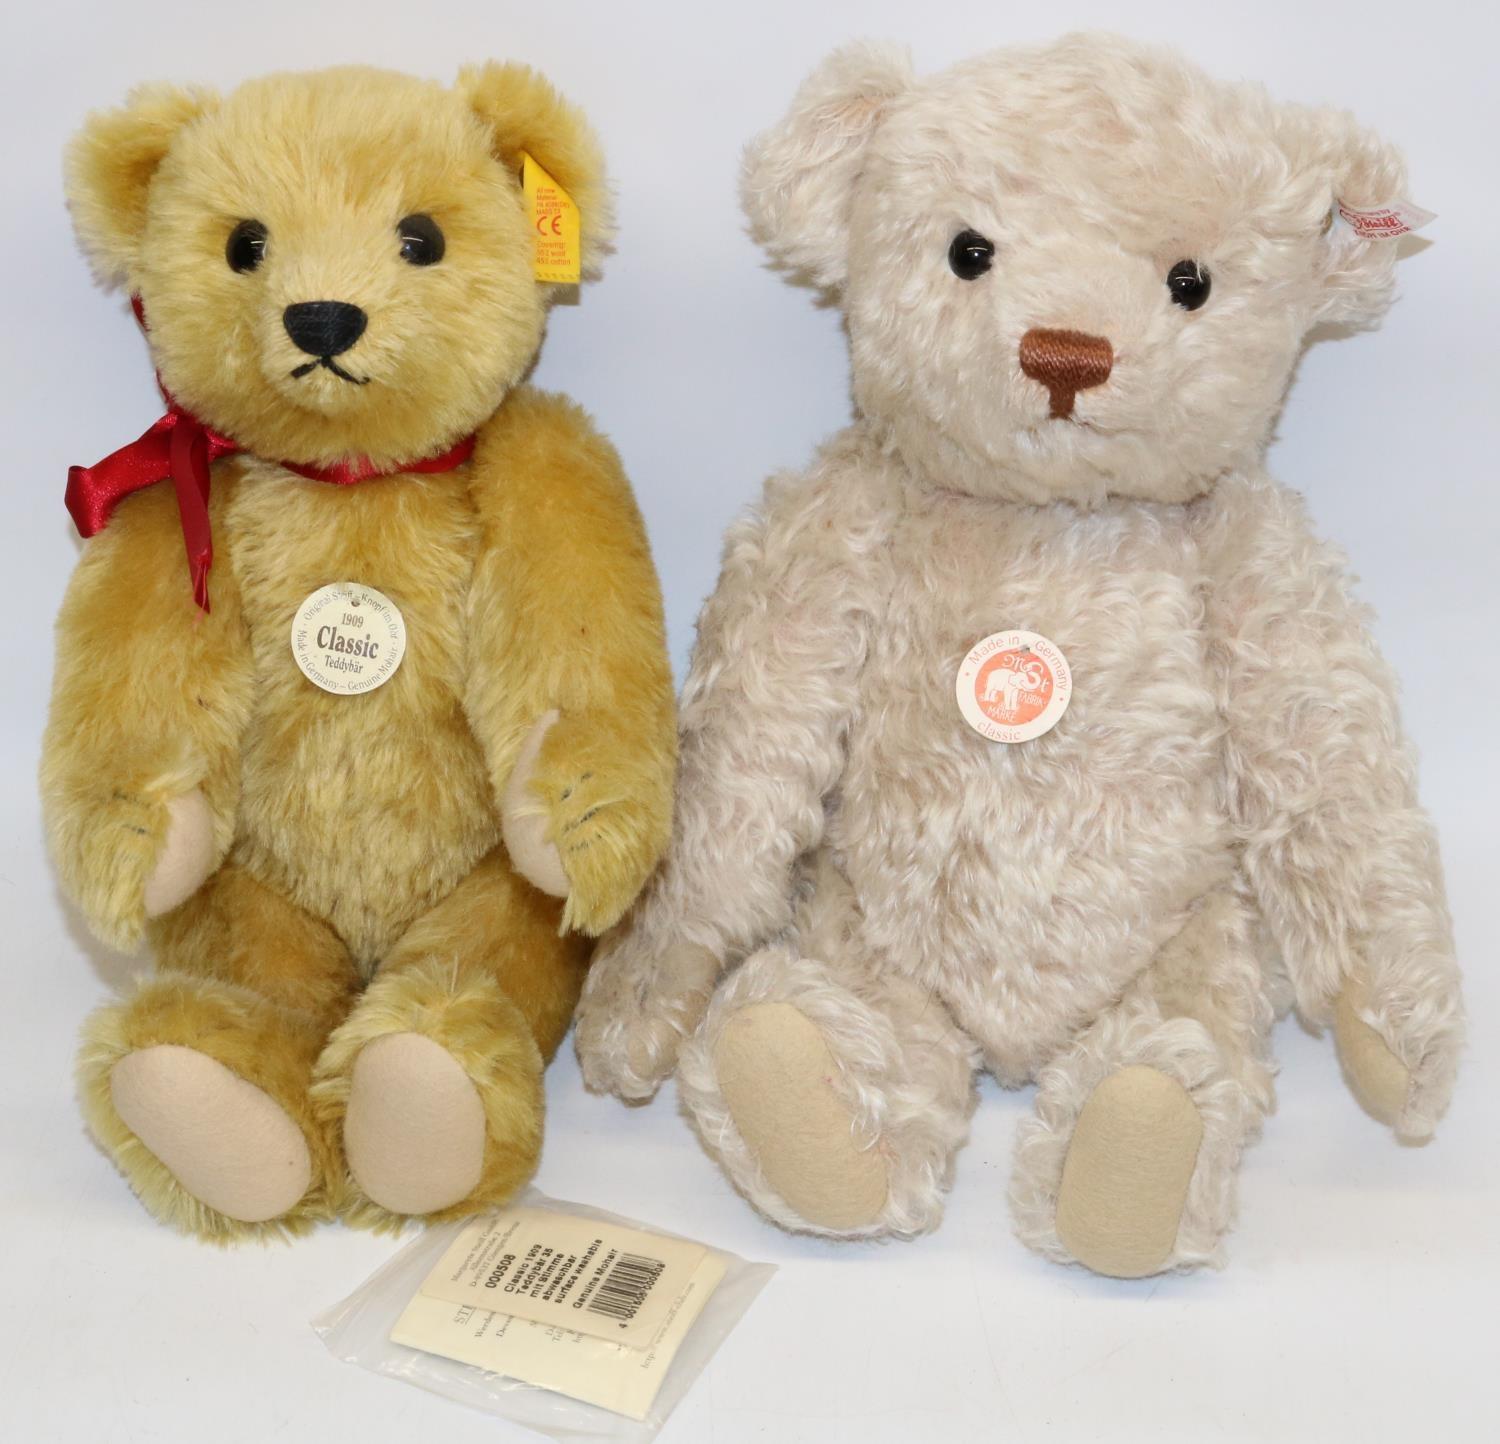 Two Steiff Classic teddy bears: 1909 reproduction bear 000508 in golden mohair, and another bear